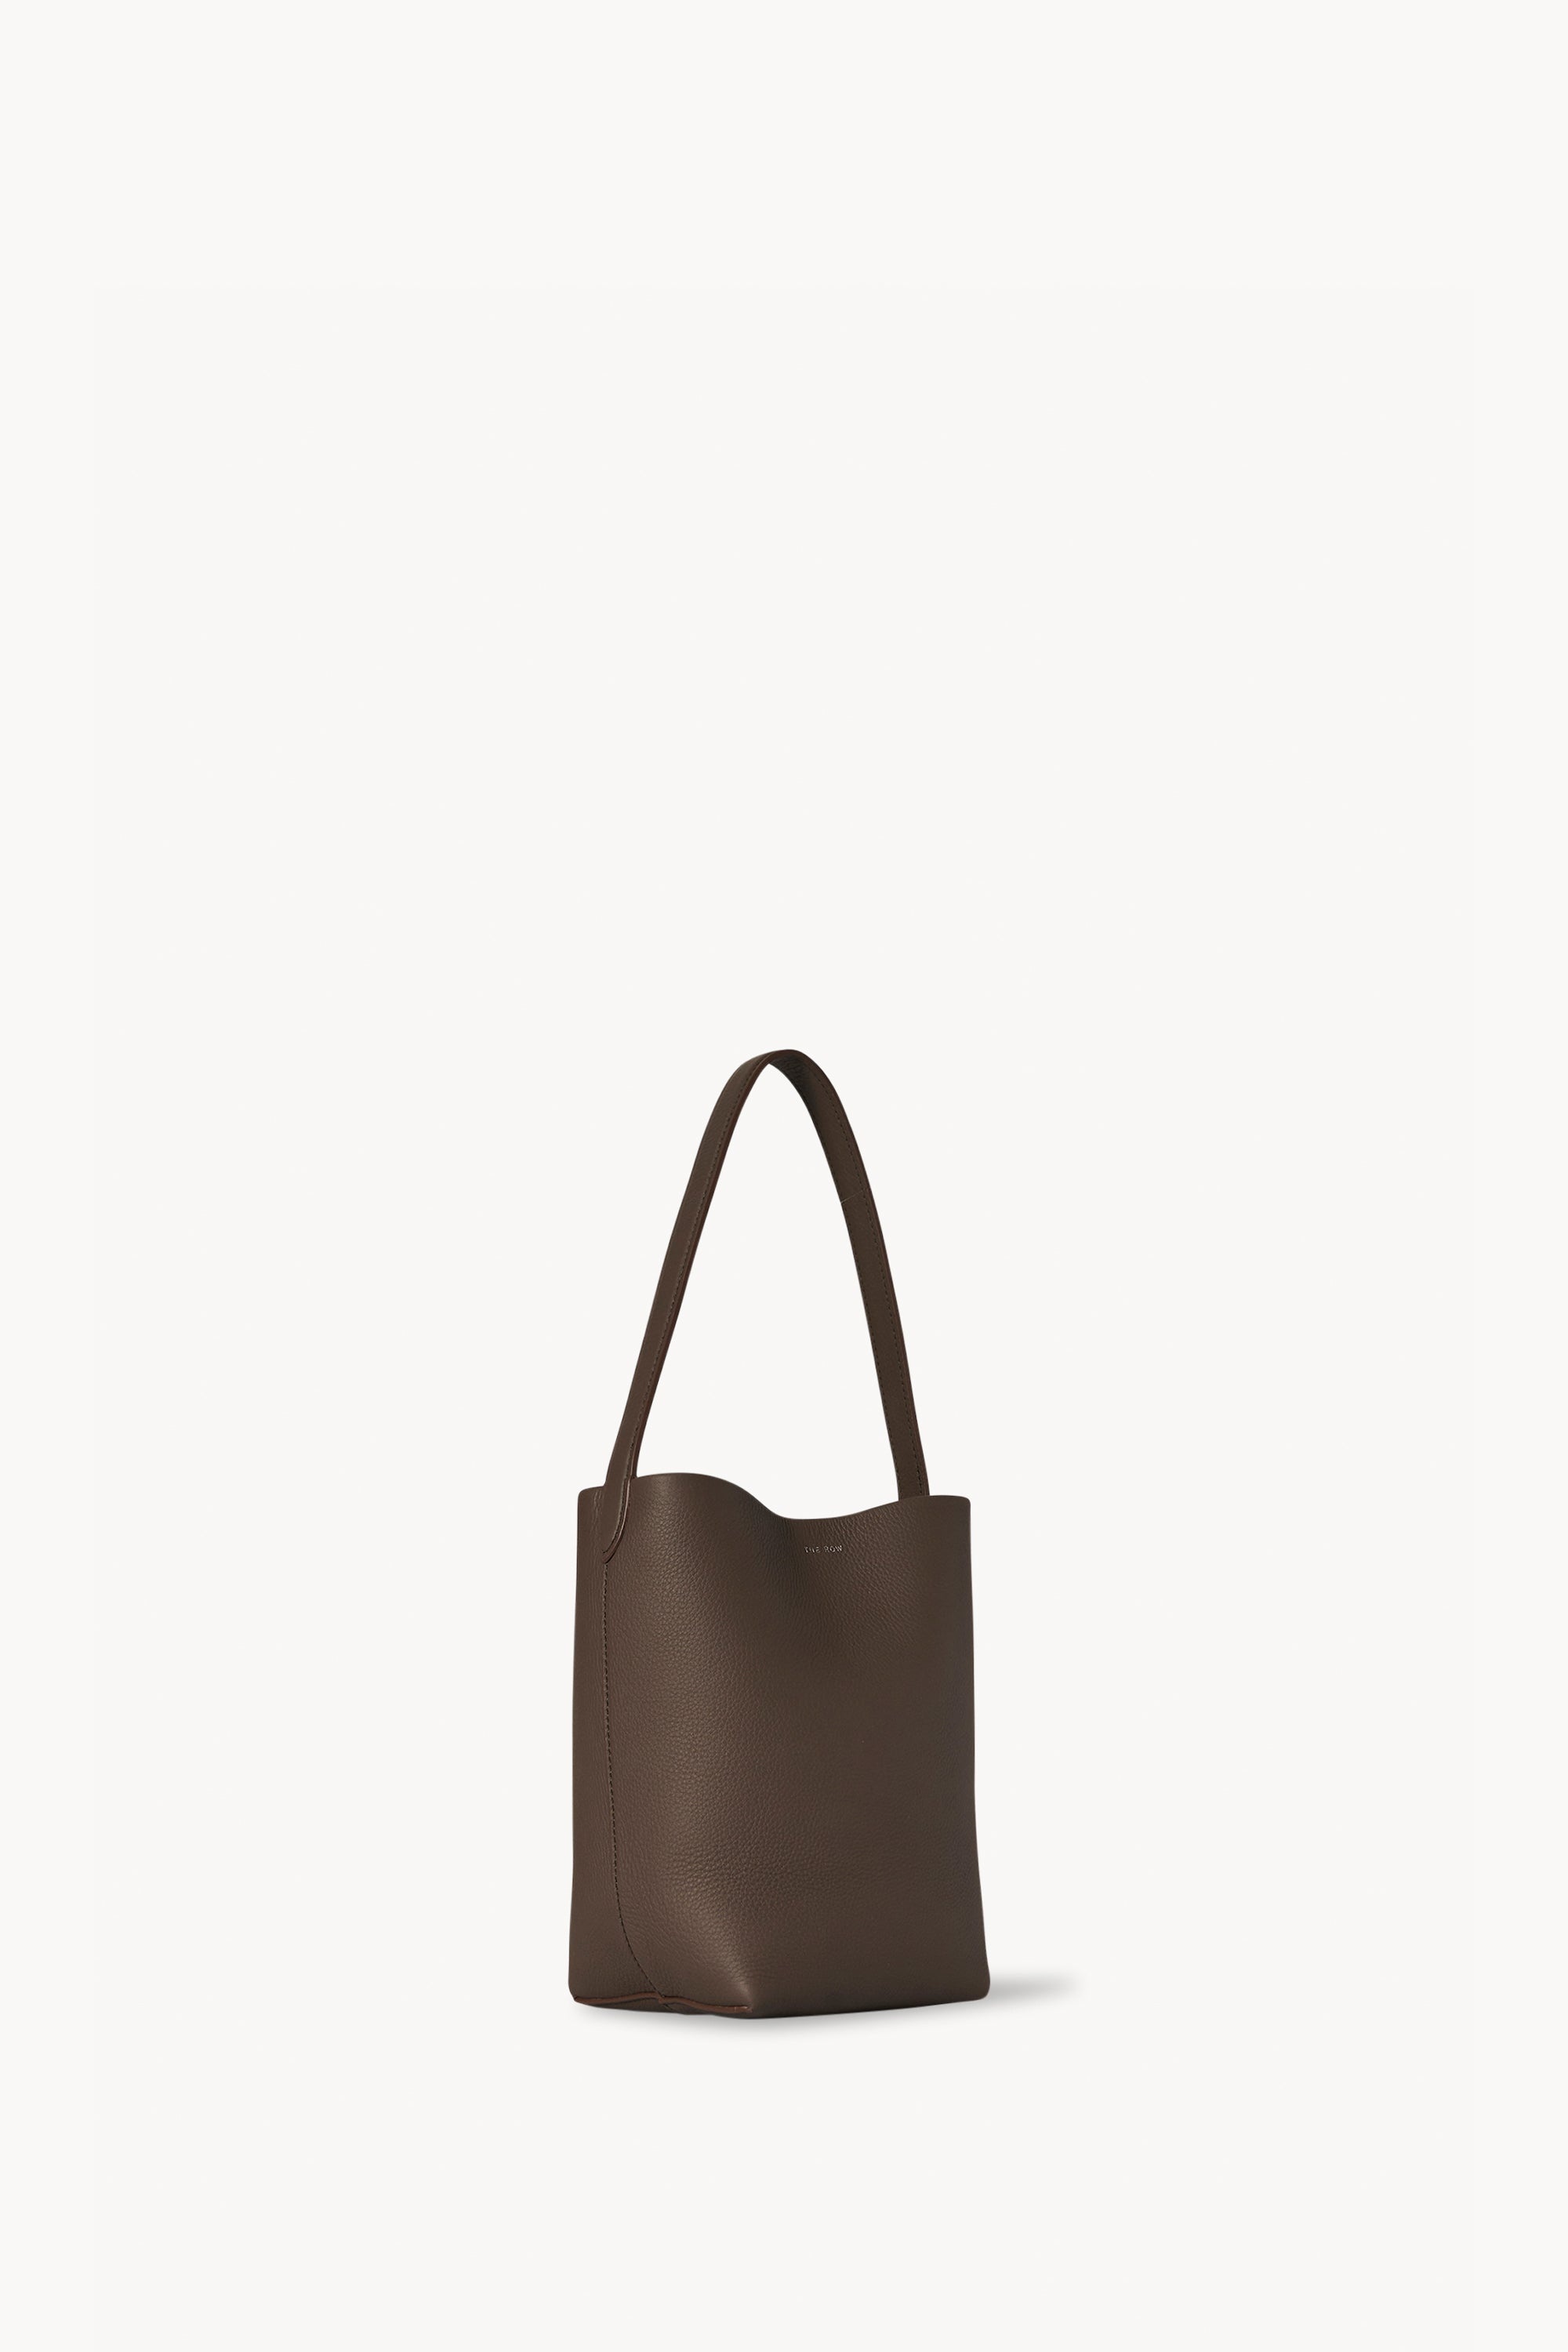 Women's Small Park Tote, THE ROW